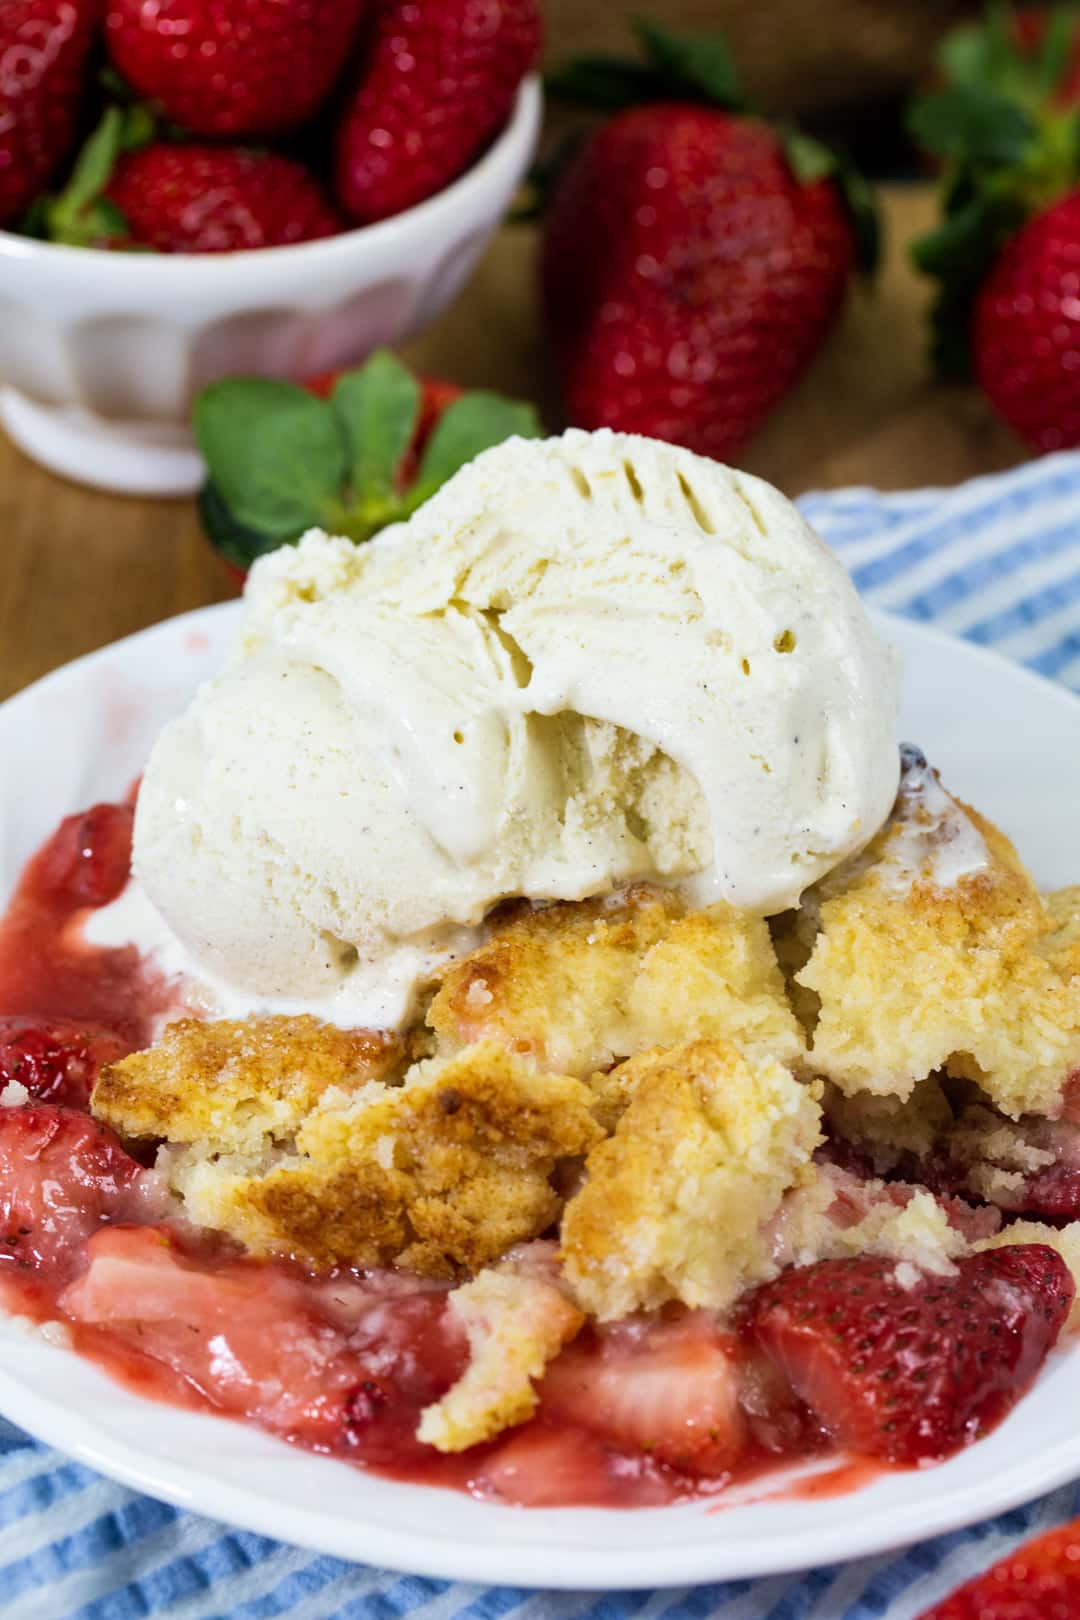 Strawberry Cobbler topped with vanilla ice cream on a plate.